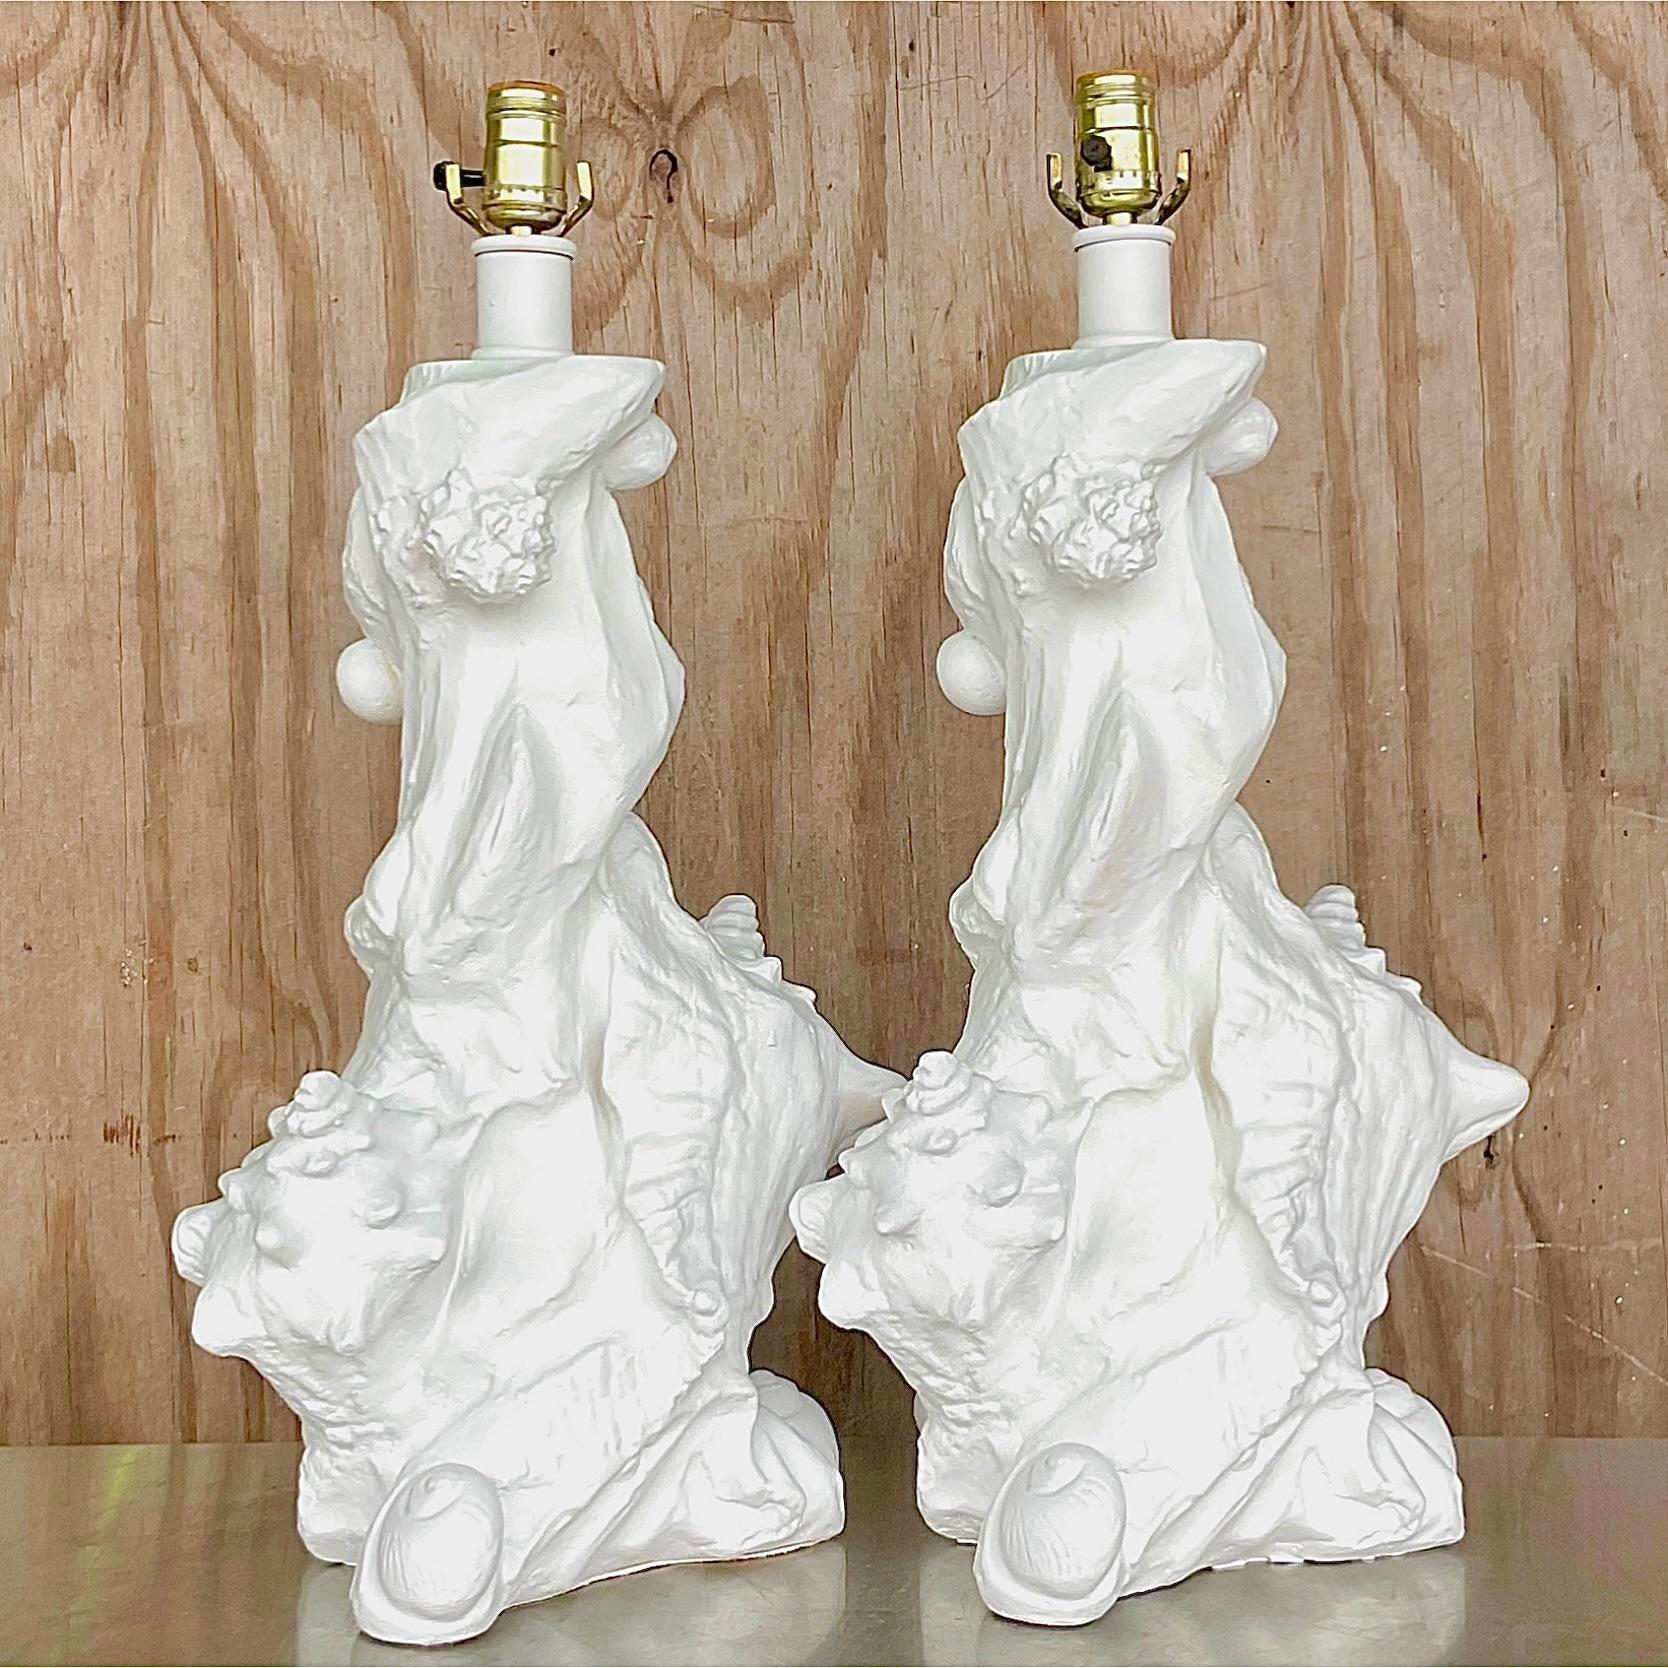 An exceptional pair of vintage Coastal table lamps. A chic plaster sculptural design filled with shells and conch shells. Done in the manner of Sirmos. Acquired from a Miami estate.